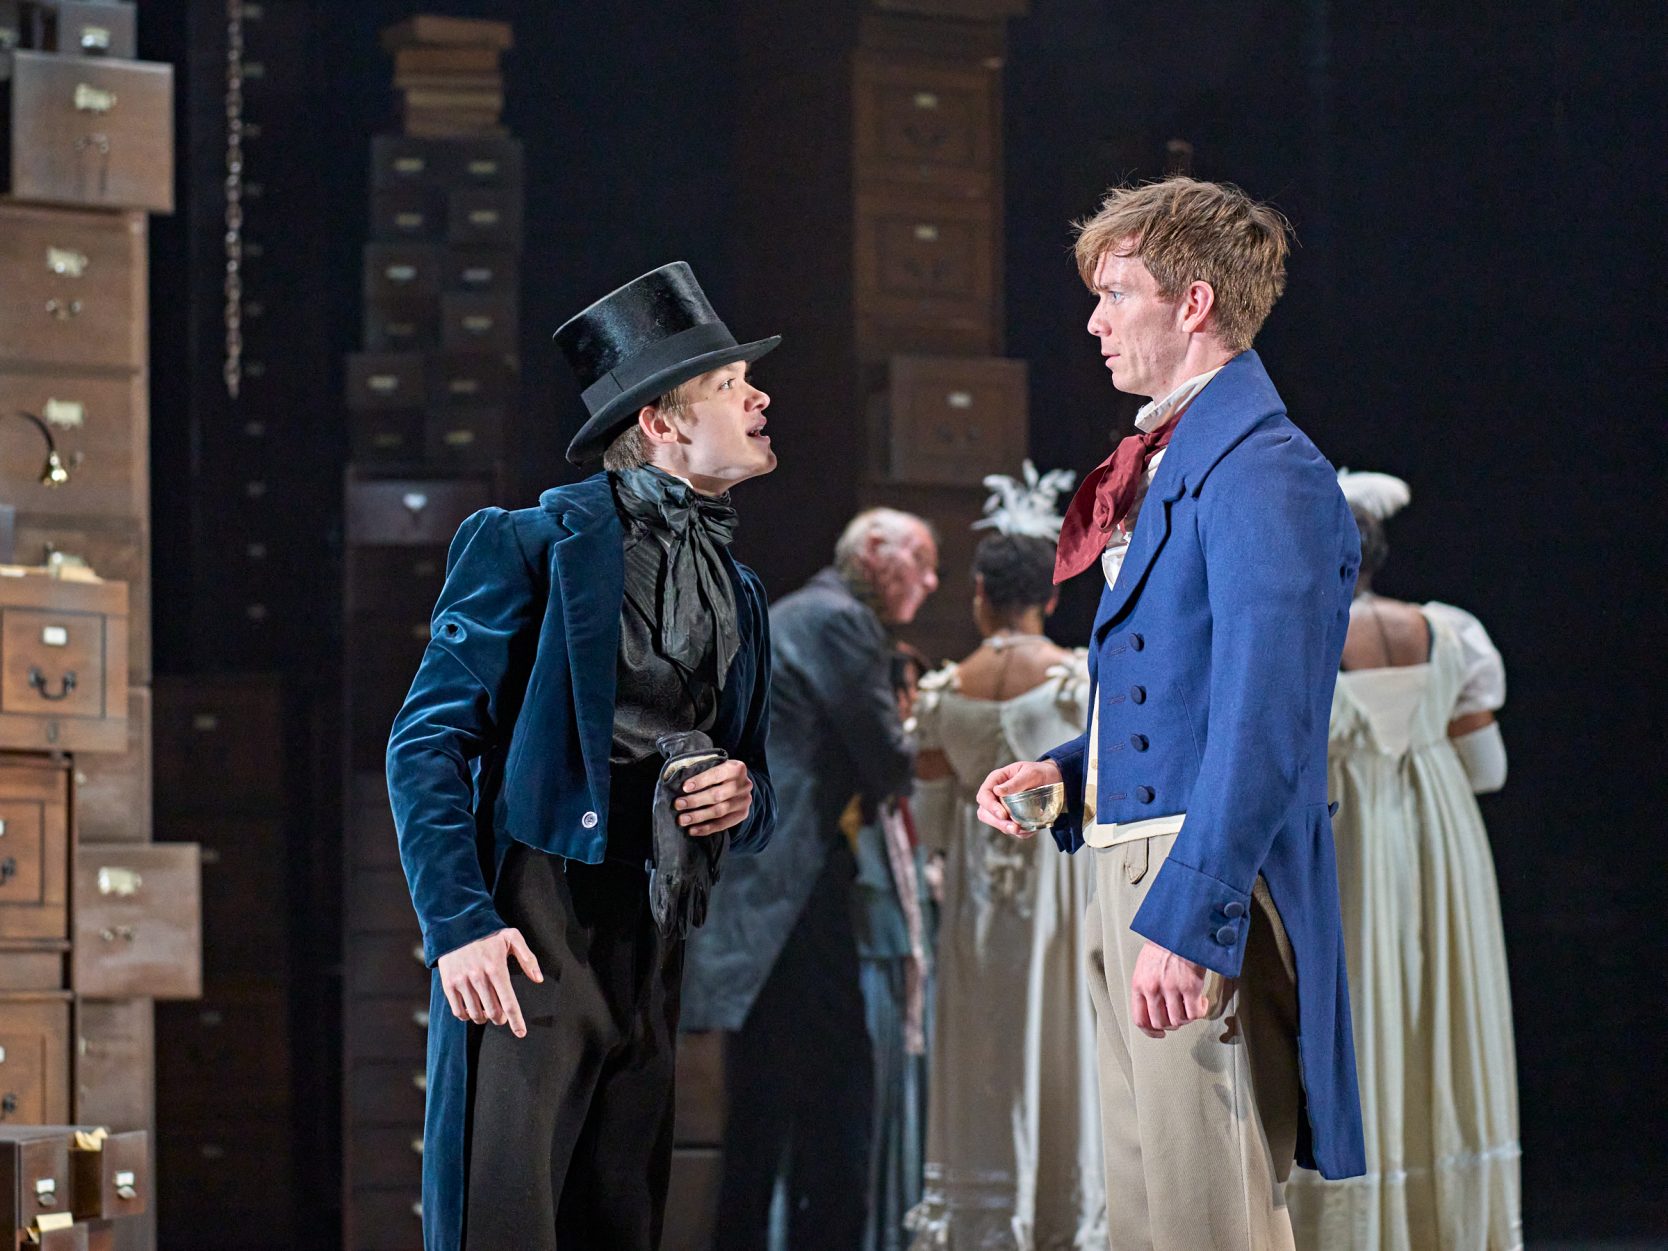 (L-R) Zak Ford-Williams as Young Marley, James Backway as Young Scrooge